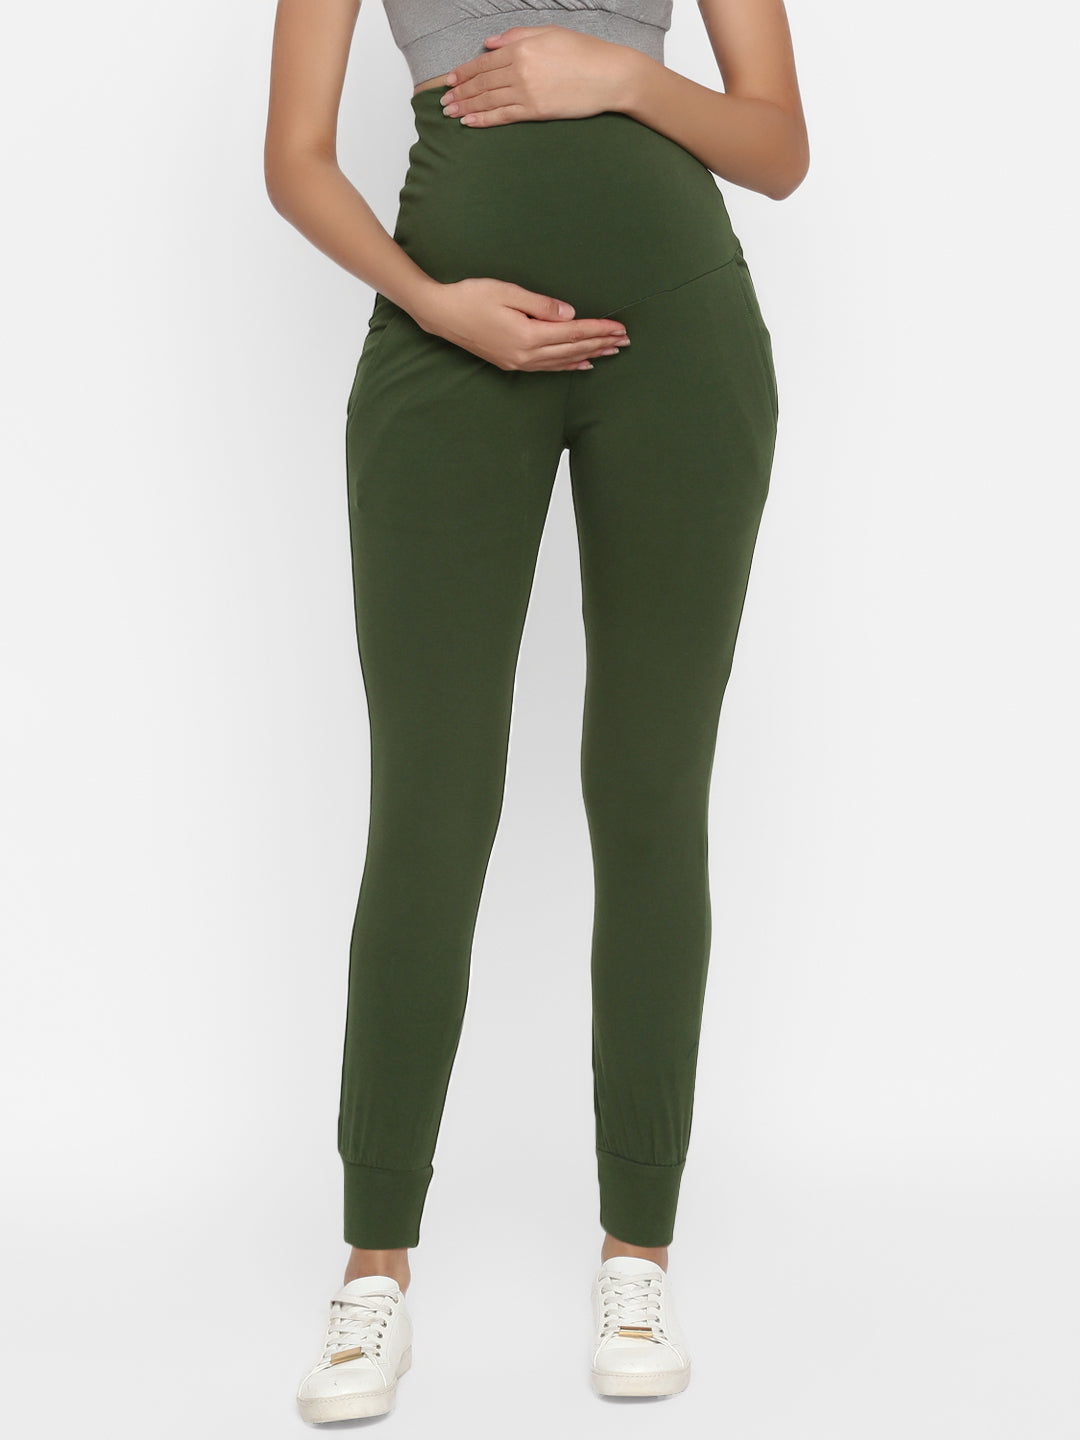 Over Bump Maternity Athletic Track Pants - Myrtle Green